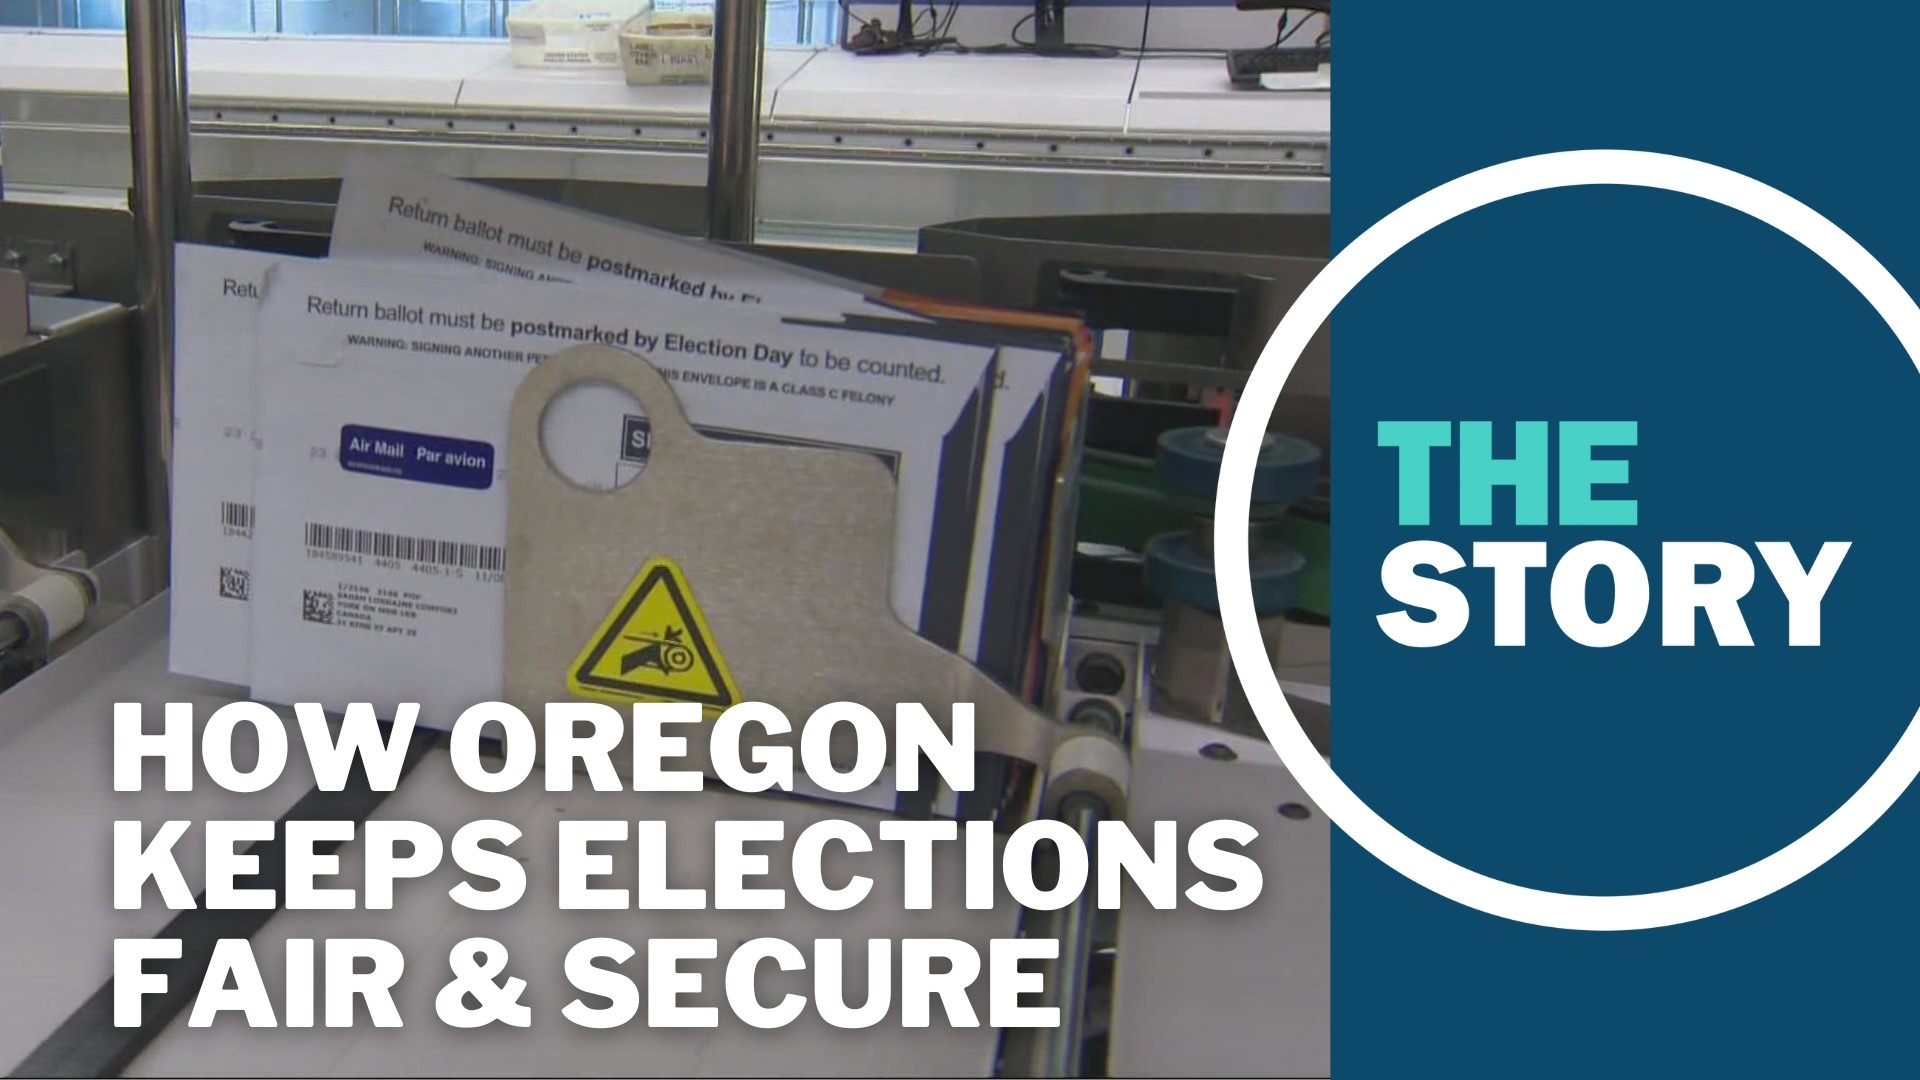 Viewers asked us questions about how election security works in Oregon. We looked into it and got the answers.